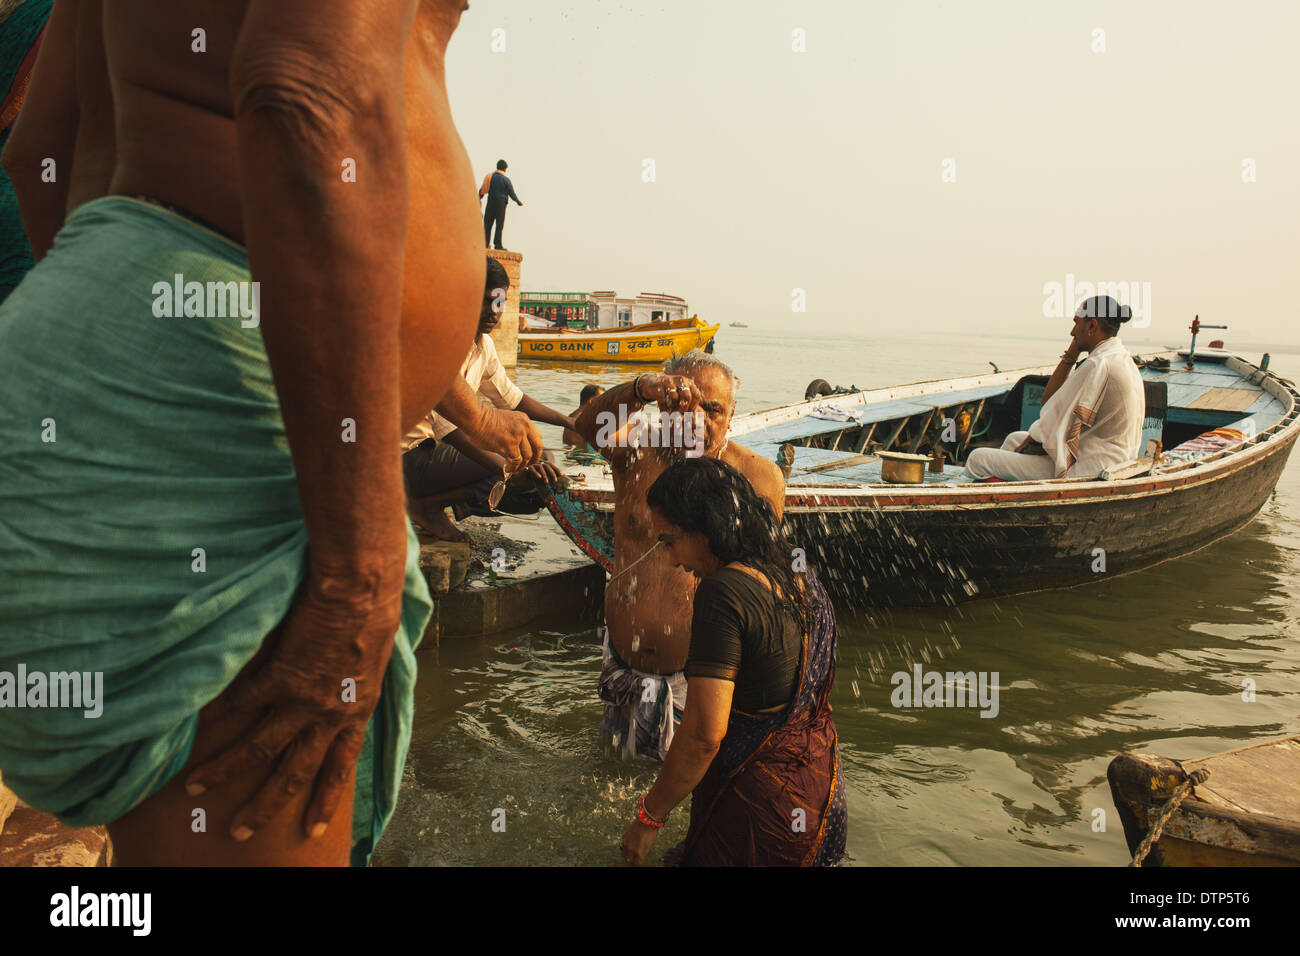 A couple bathing in the ganges, Varanasi, India Stock Photo